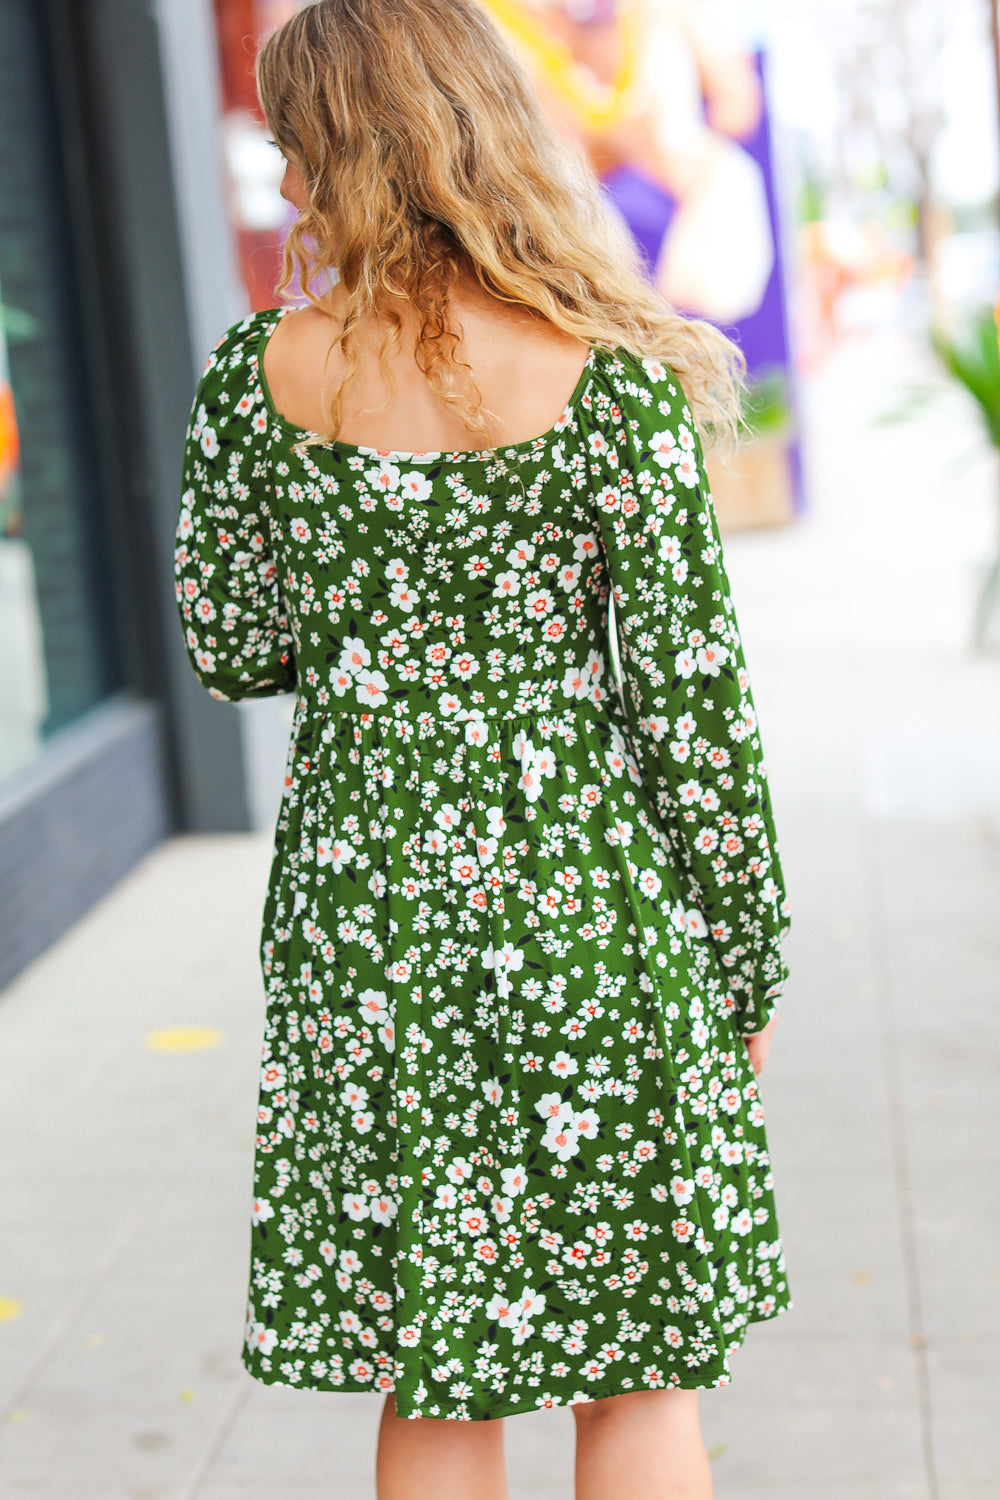 Positively Perfect Floral Dress